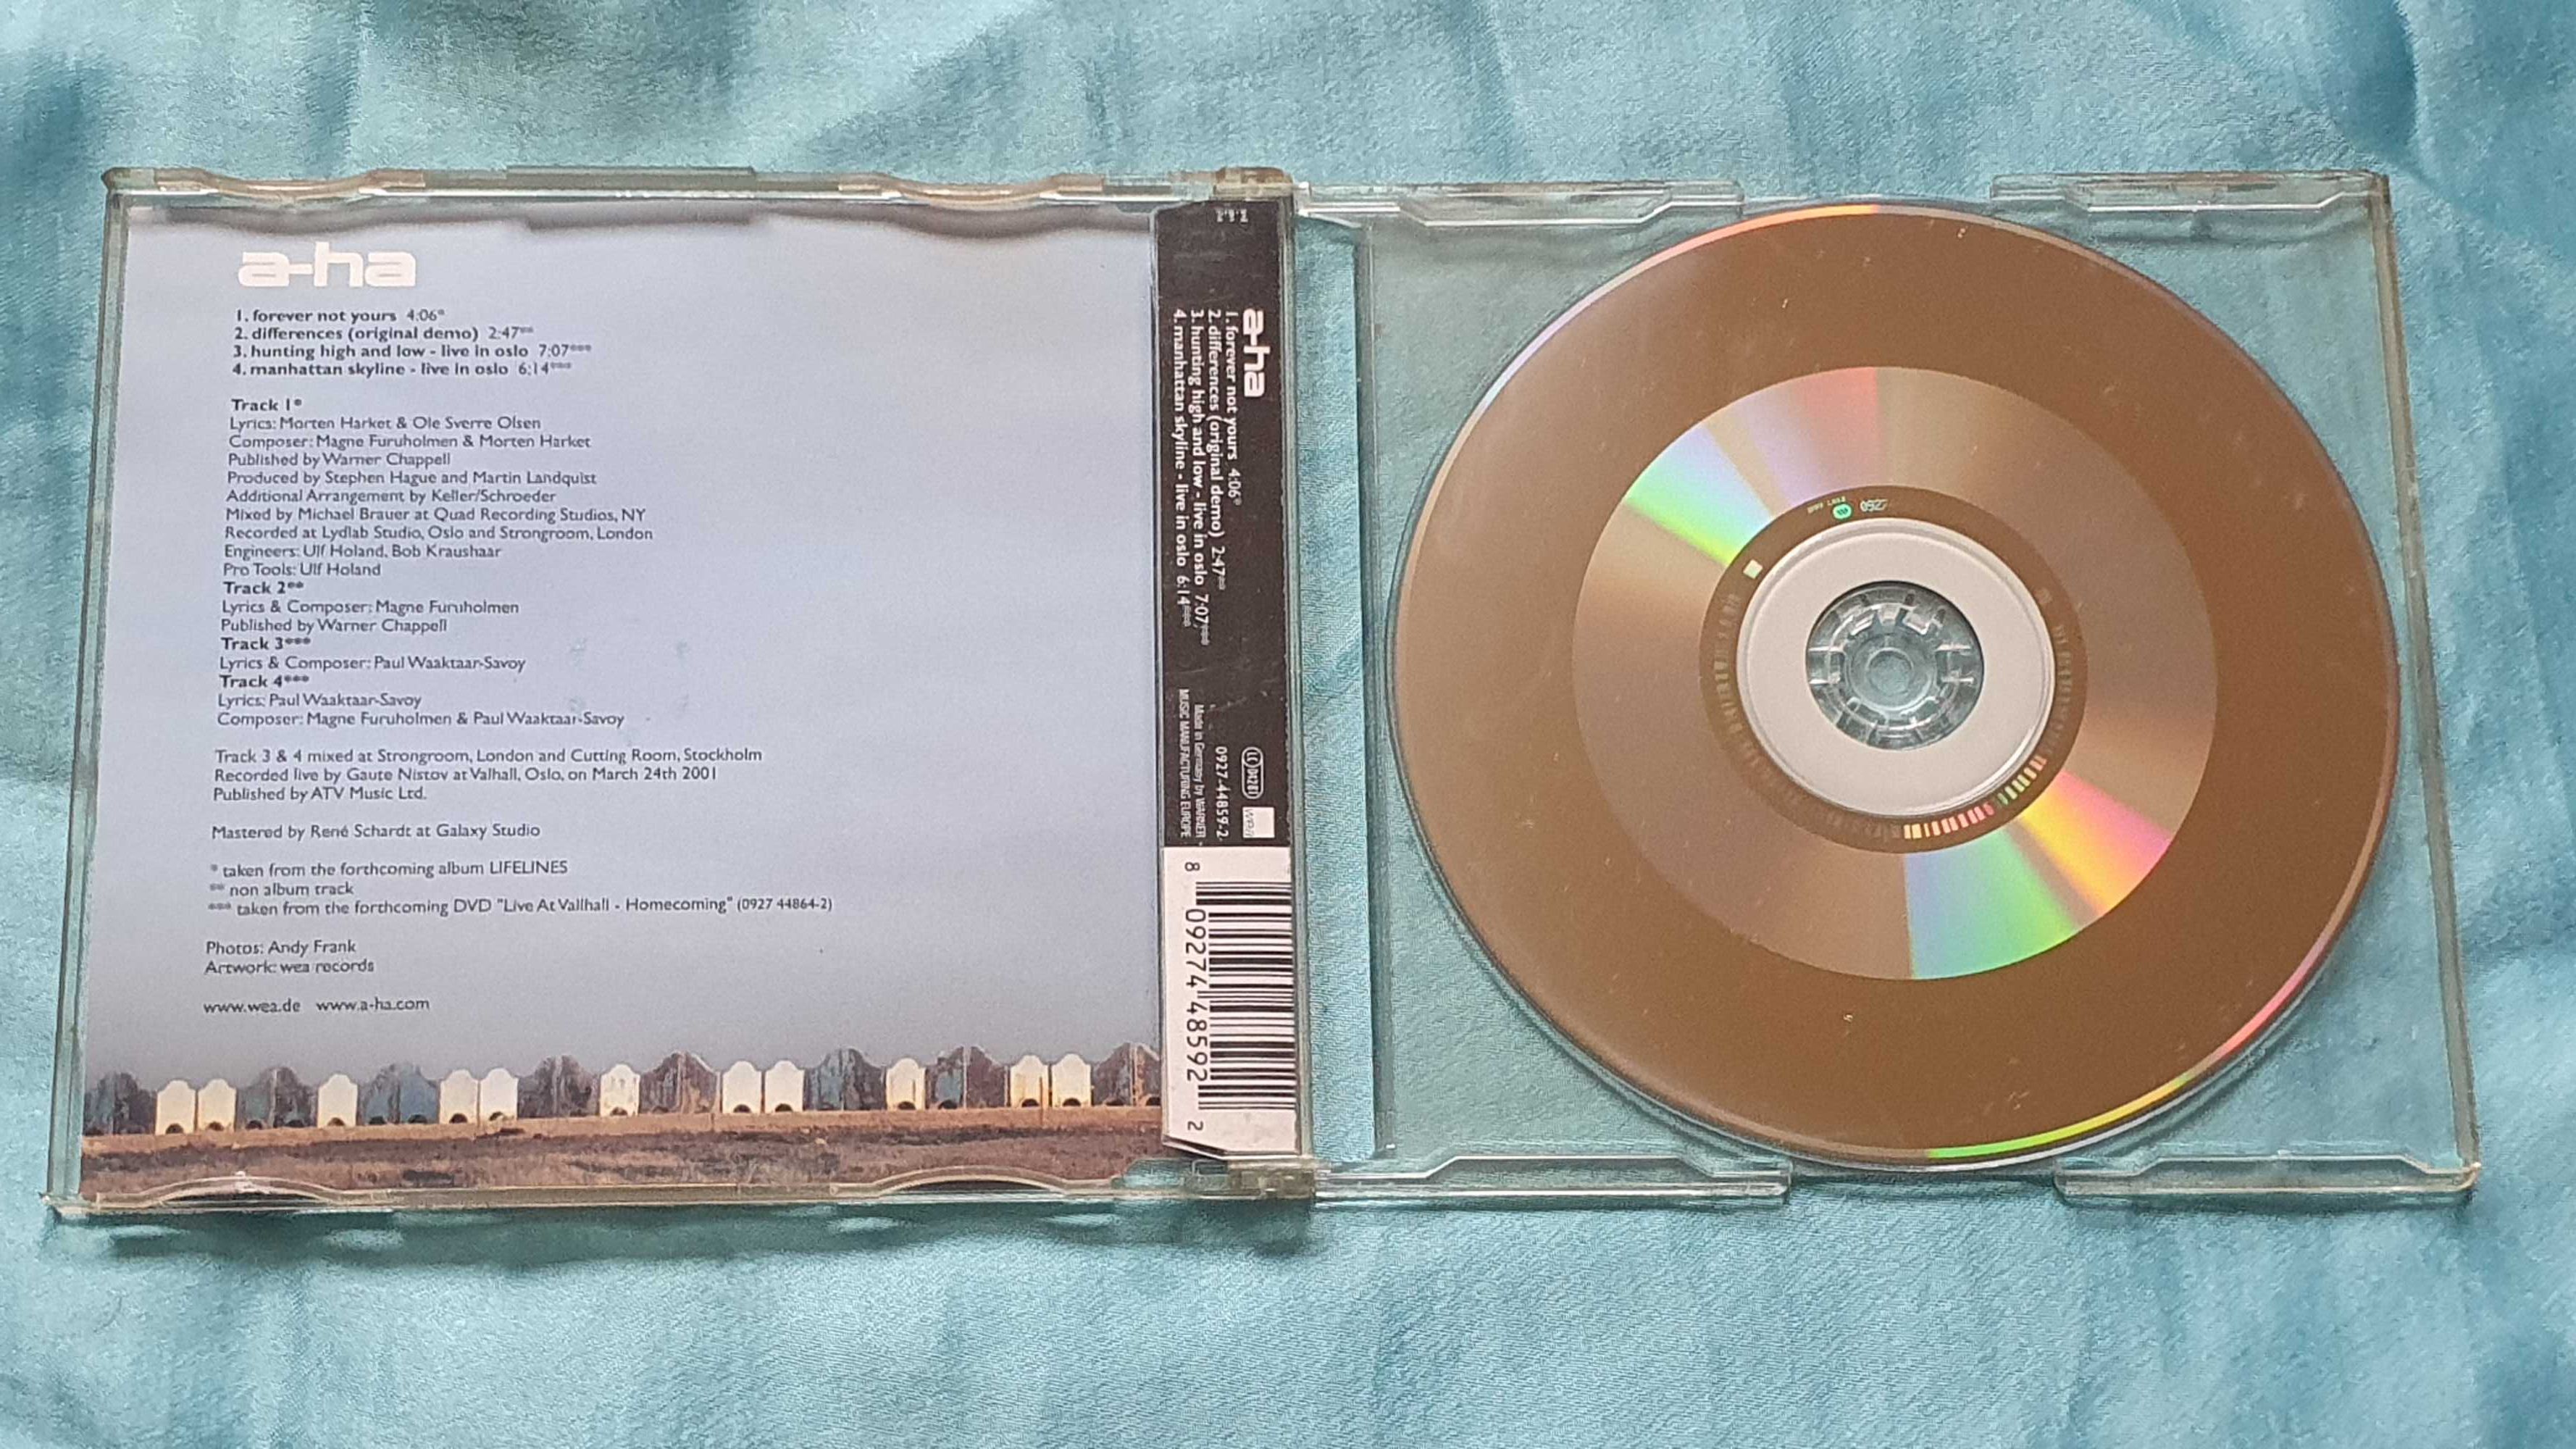 A-HA  -  Forever Not Yours  singiel  CD